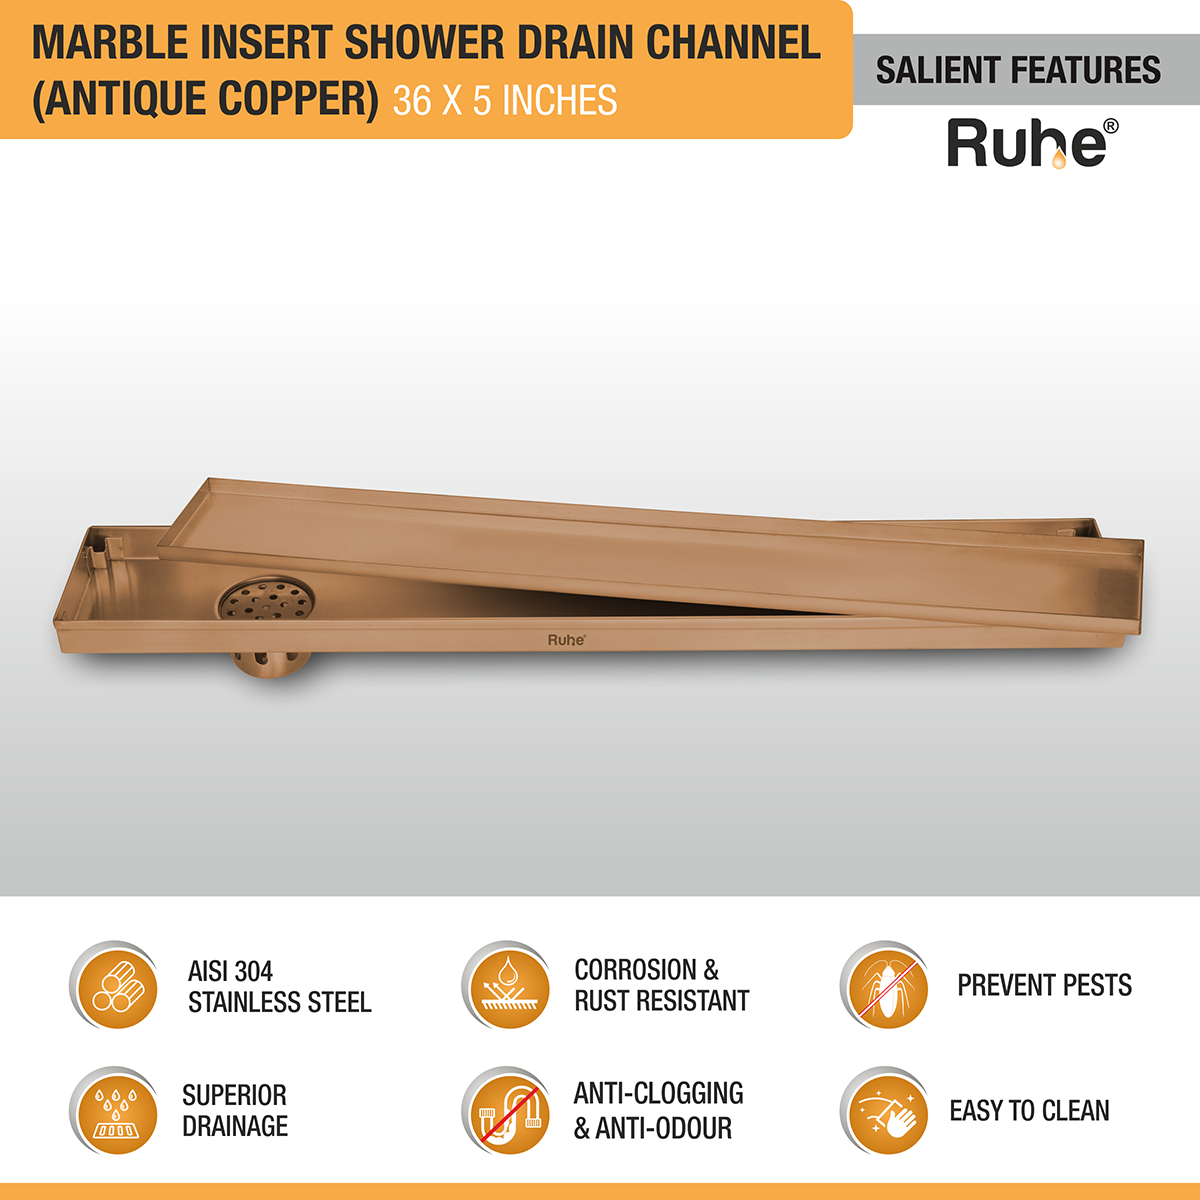 Marble Insert Shower Drain Channel (36 x 5 Inches) ROSE GOLD PVD Coated features and benefits